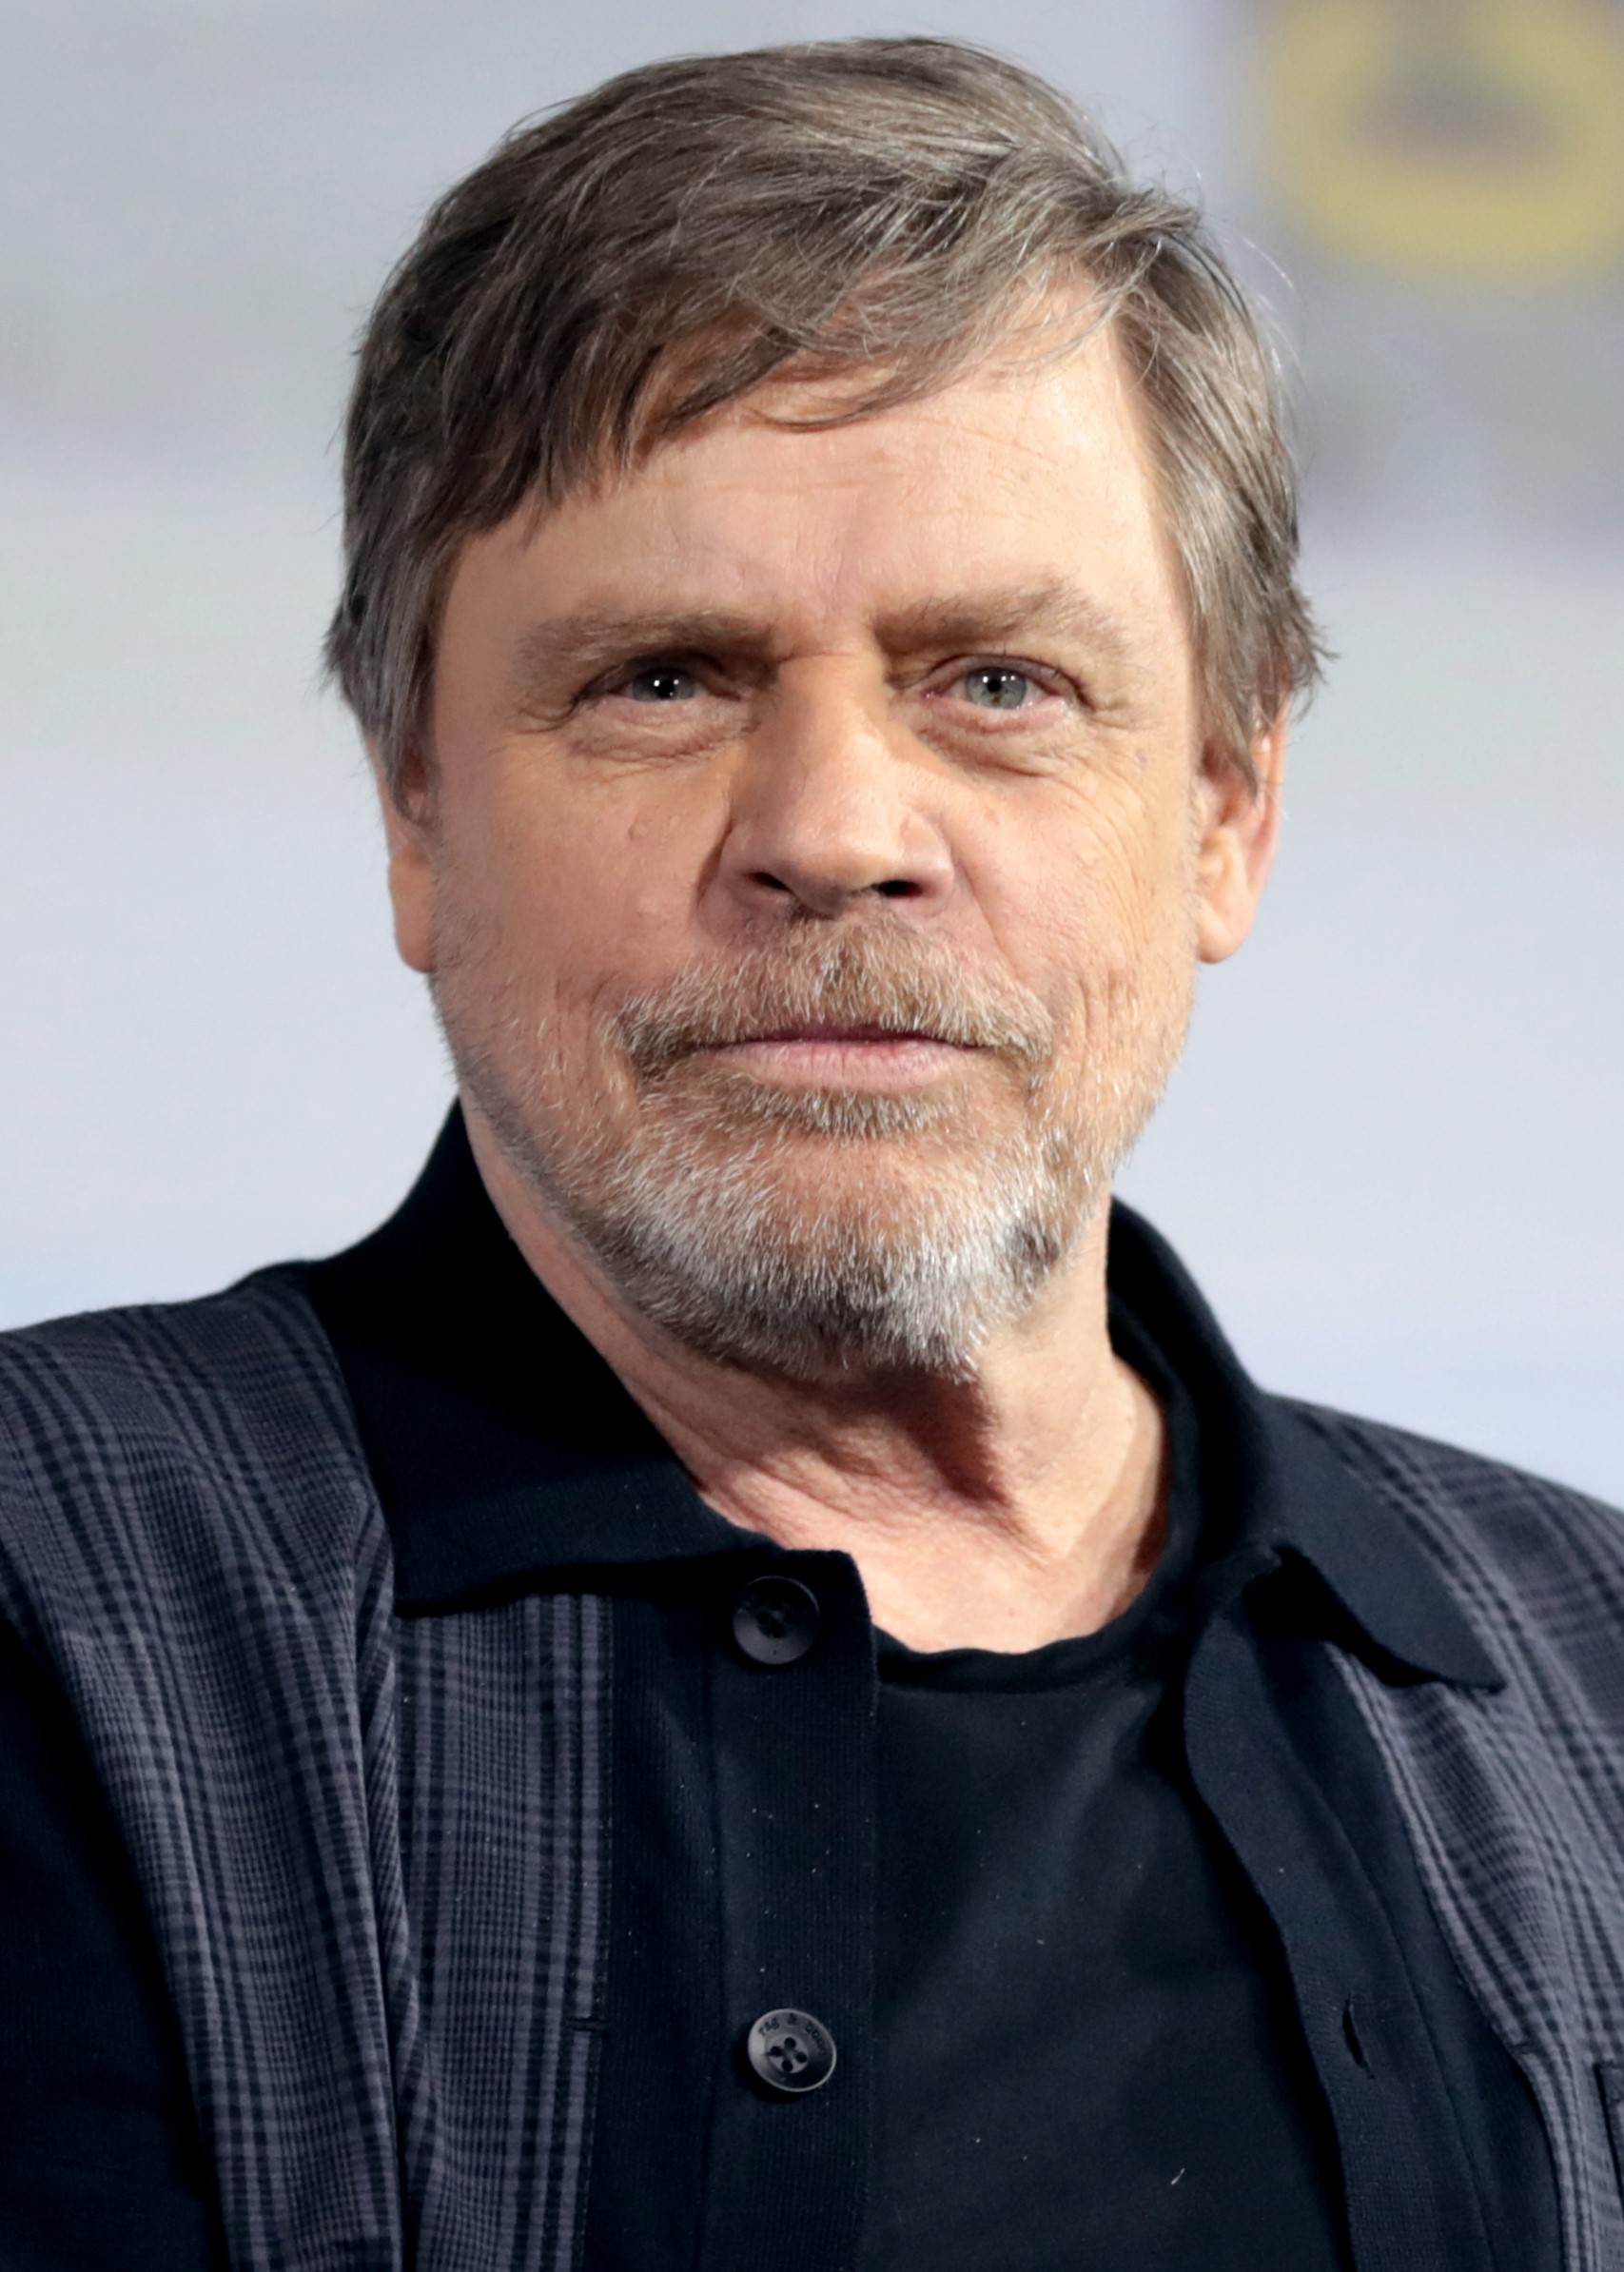 Colorized by - It's Mark Hamill